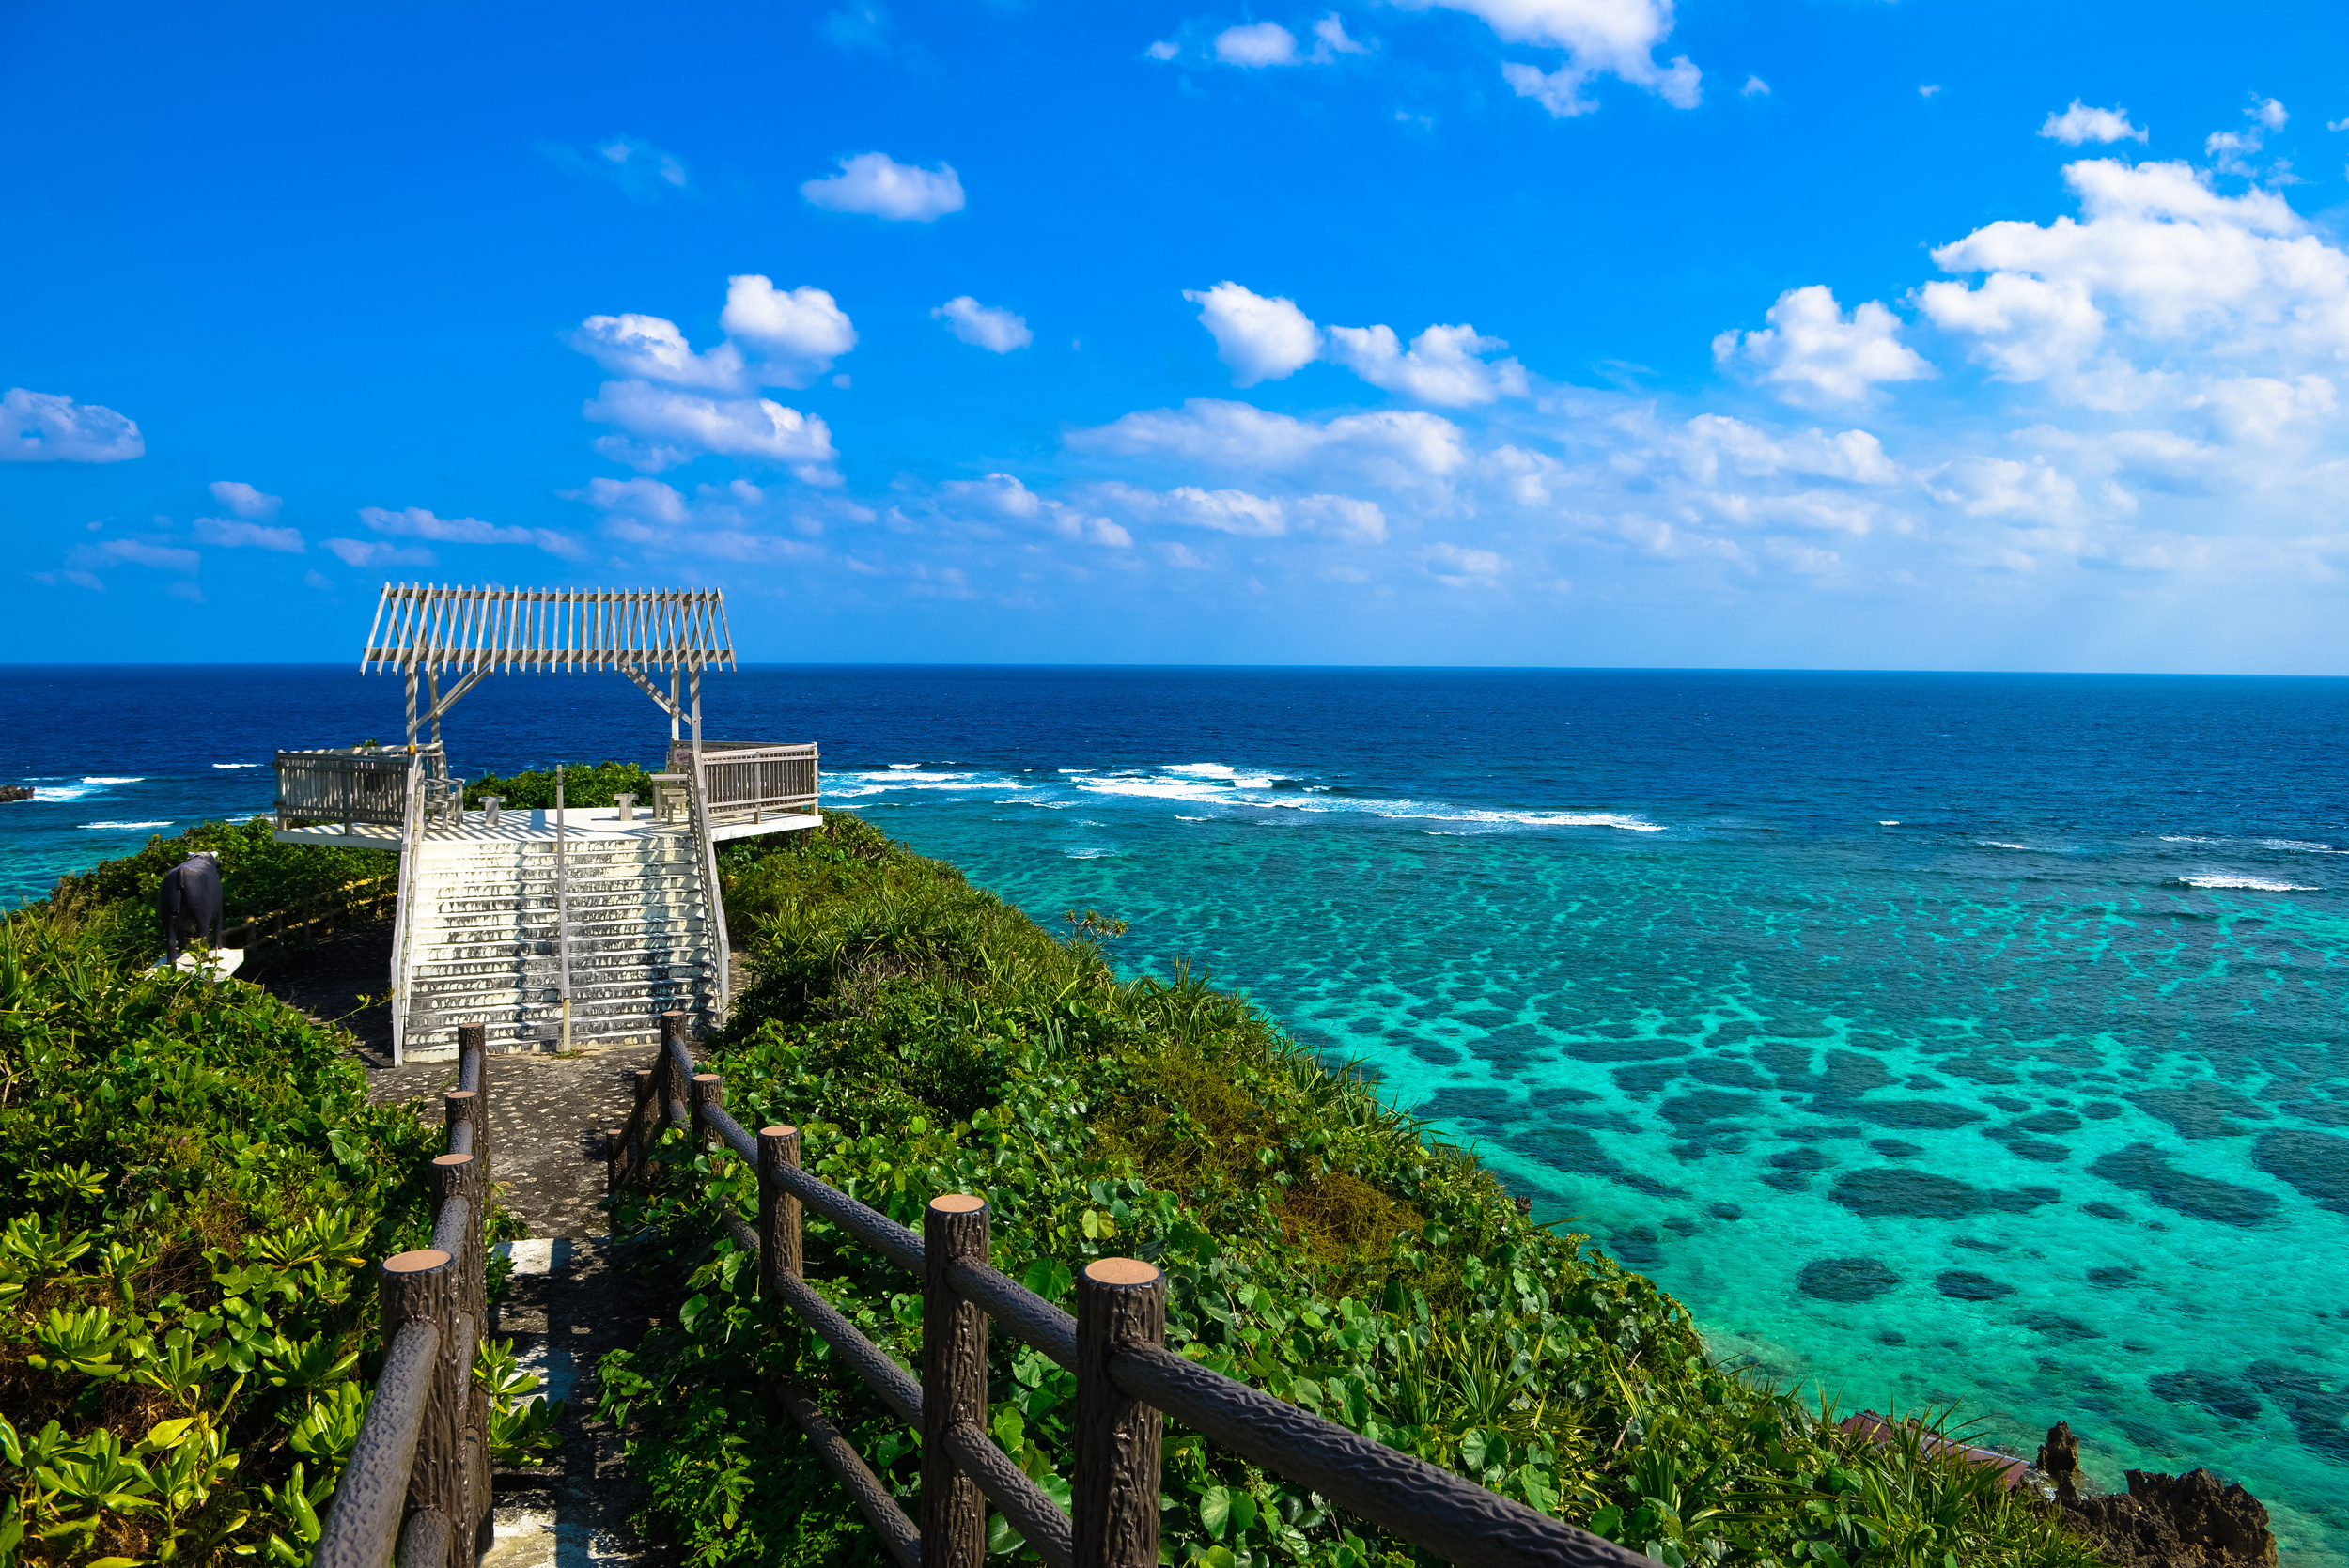 <p>Japan might not seem like the most obvious choice at first. After all, in a lot of the country, it is proper winter. However, the smaller, southern island of Okinawa has more of a tropical climate that stays warm year-round. Enjoy beach time and t-shirt weather, no matter the month you visit!</p><p><a href='https://www.msn.com/en-us/community/channel/vid-cj9pqbr0vn9in2b6ddcd8sfgpfq6x6utp44fssrv6mc2gtybw0us'>Follow us on MSN to see more of our exclusive lifestyle content.</a></p>